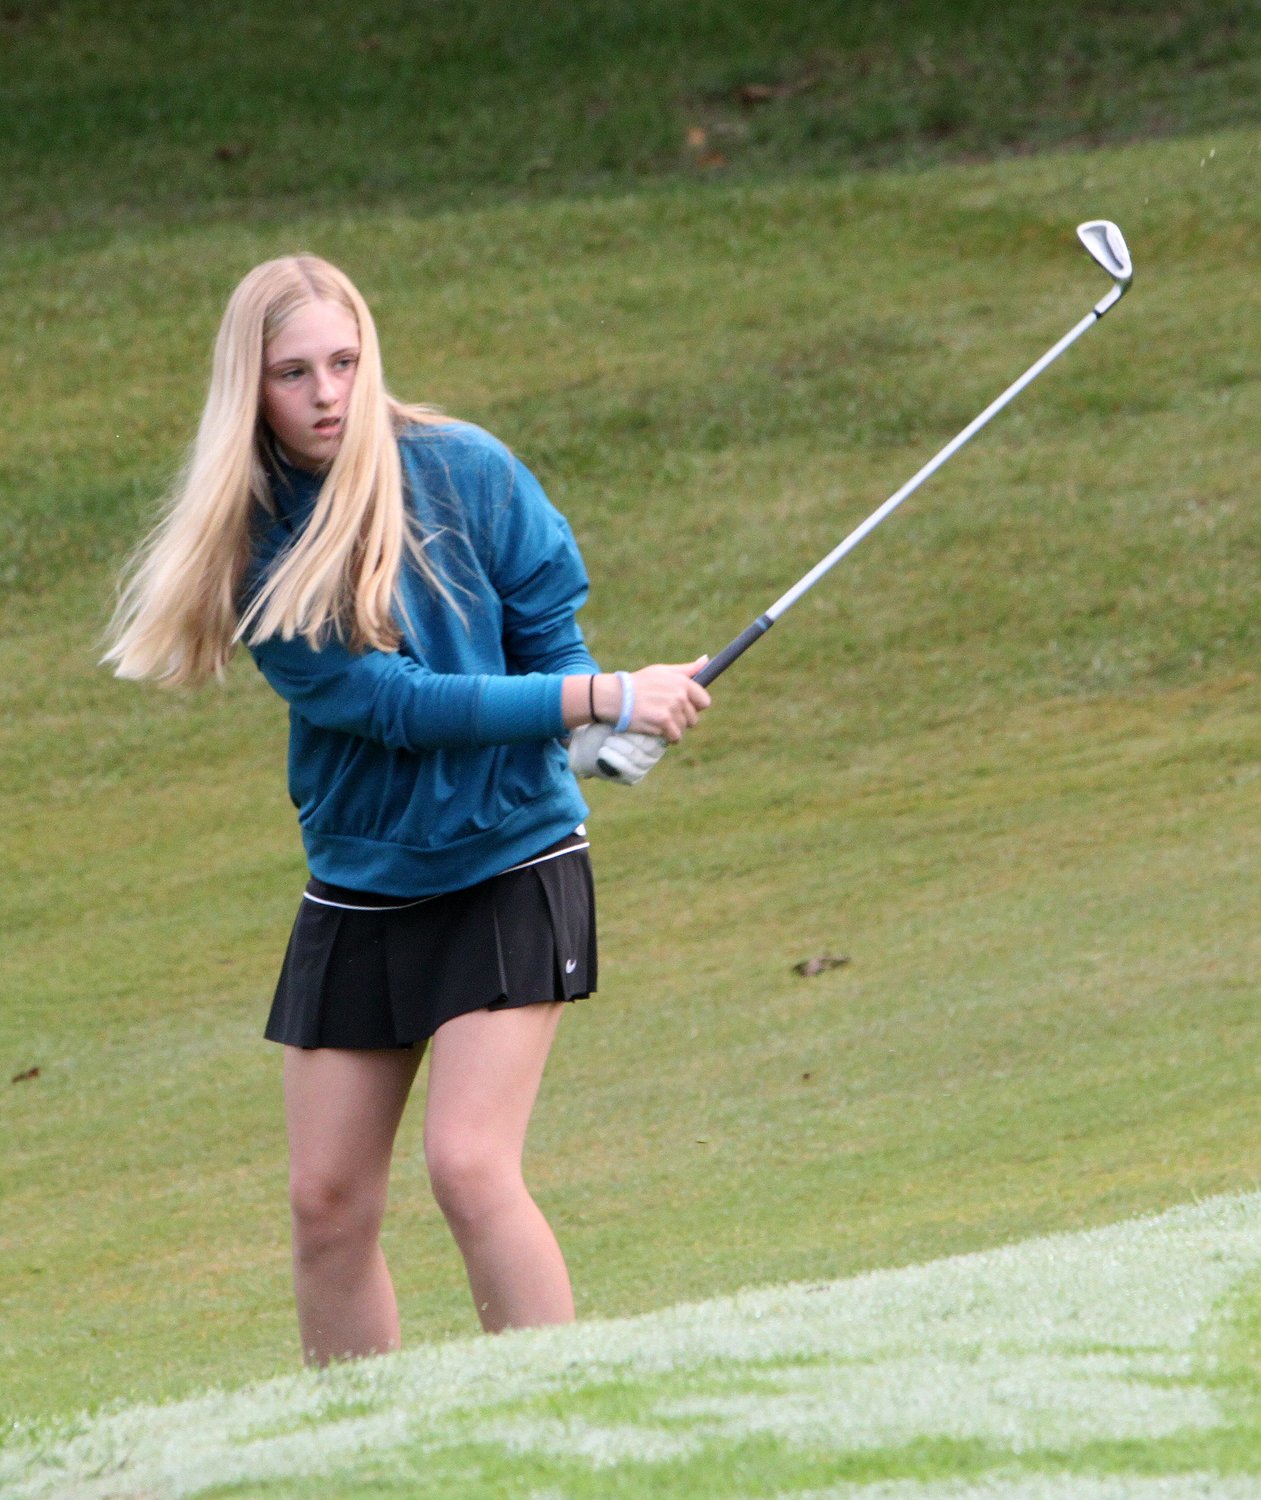 Westran High School's  Vallie Schermerhorn watches her chip shot toward the green on hole no. 6 during a golf meet played last fall at Moberly's Heritage Hills Golf Course. Schermerhorn is one of four returning girls to the varsity golf team who are all sophomores this 2021 fall season.